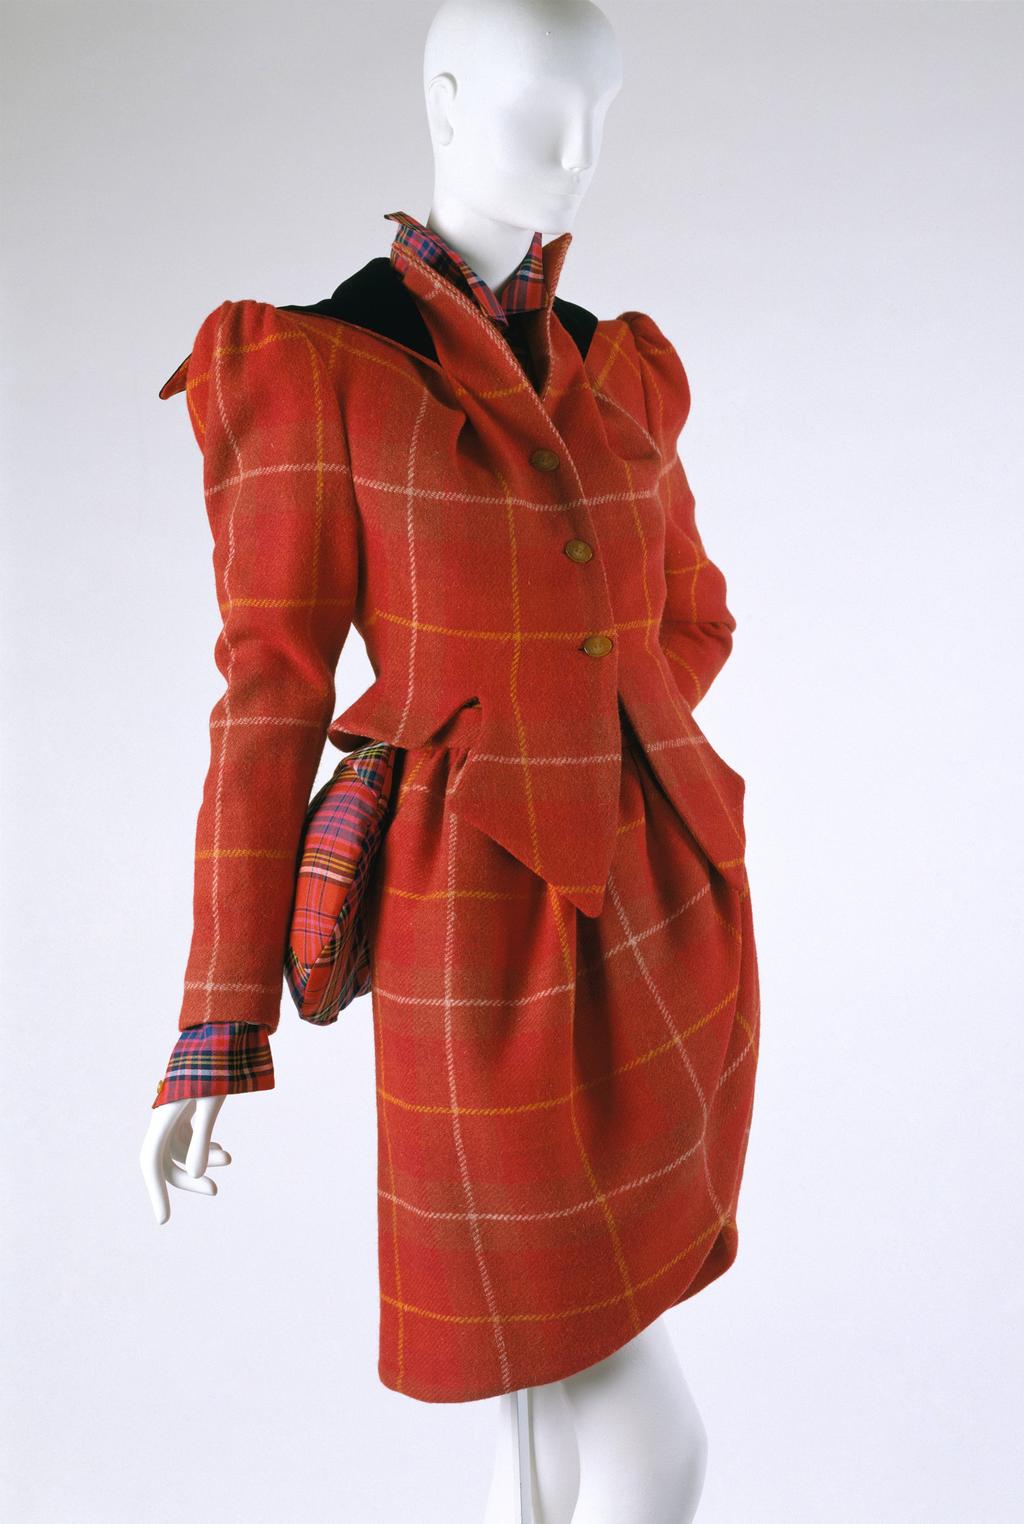 SECTION 2 DESIGN STUDIES (continued) Suit designed by Vivienne Westwood (1994) Materials: wool, cotton and leather. 12.